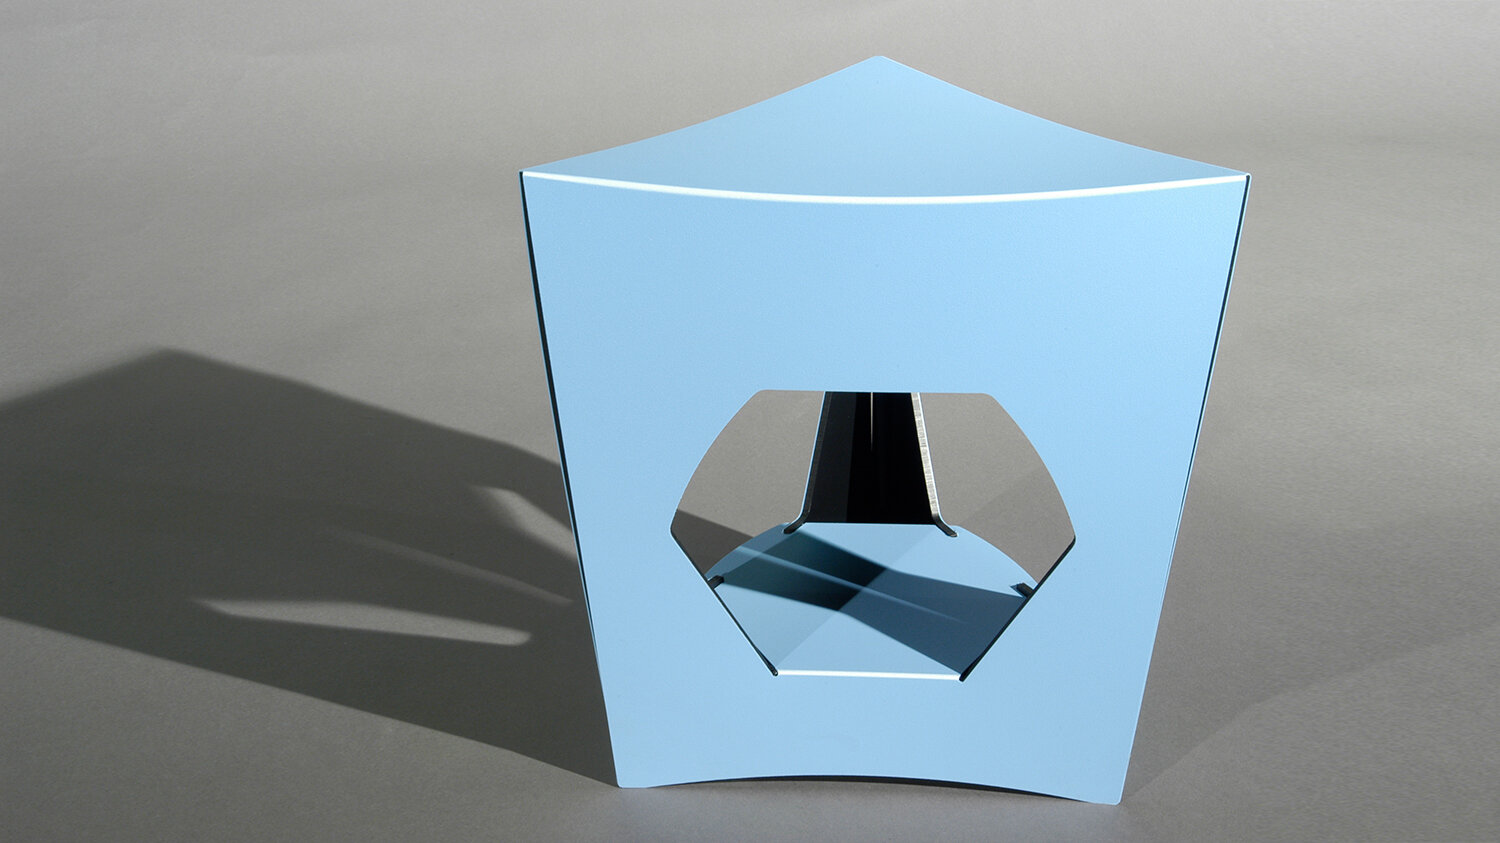 Blue-Marmalade-Low-cut-bedroom-recycled-plastic-blue-black-stool-side-table-black-made-to-order-recyclable-zero-waste.jpg